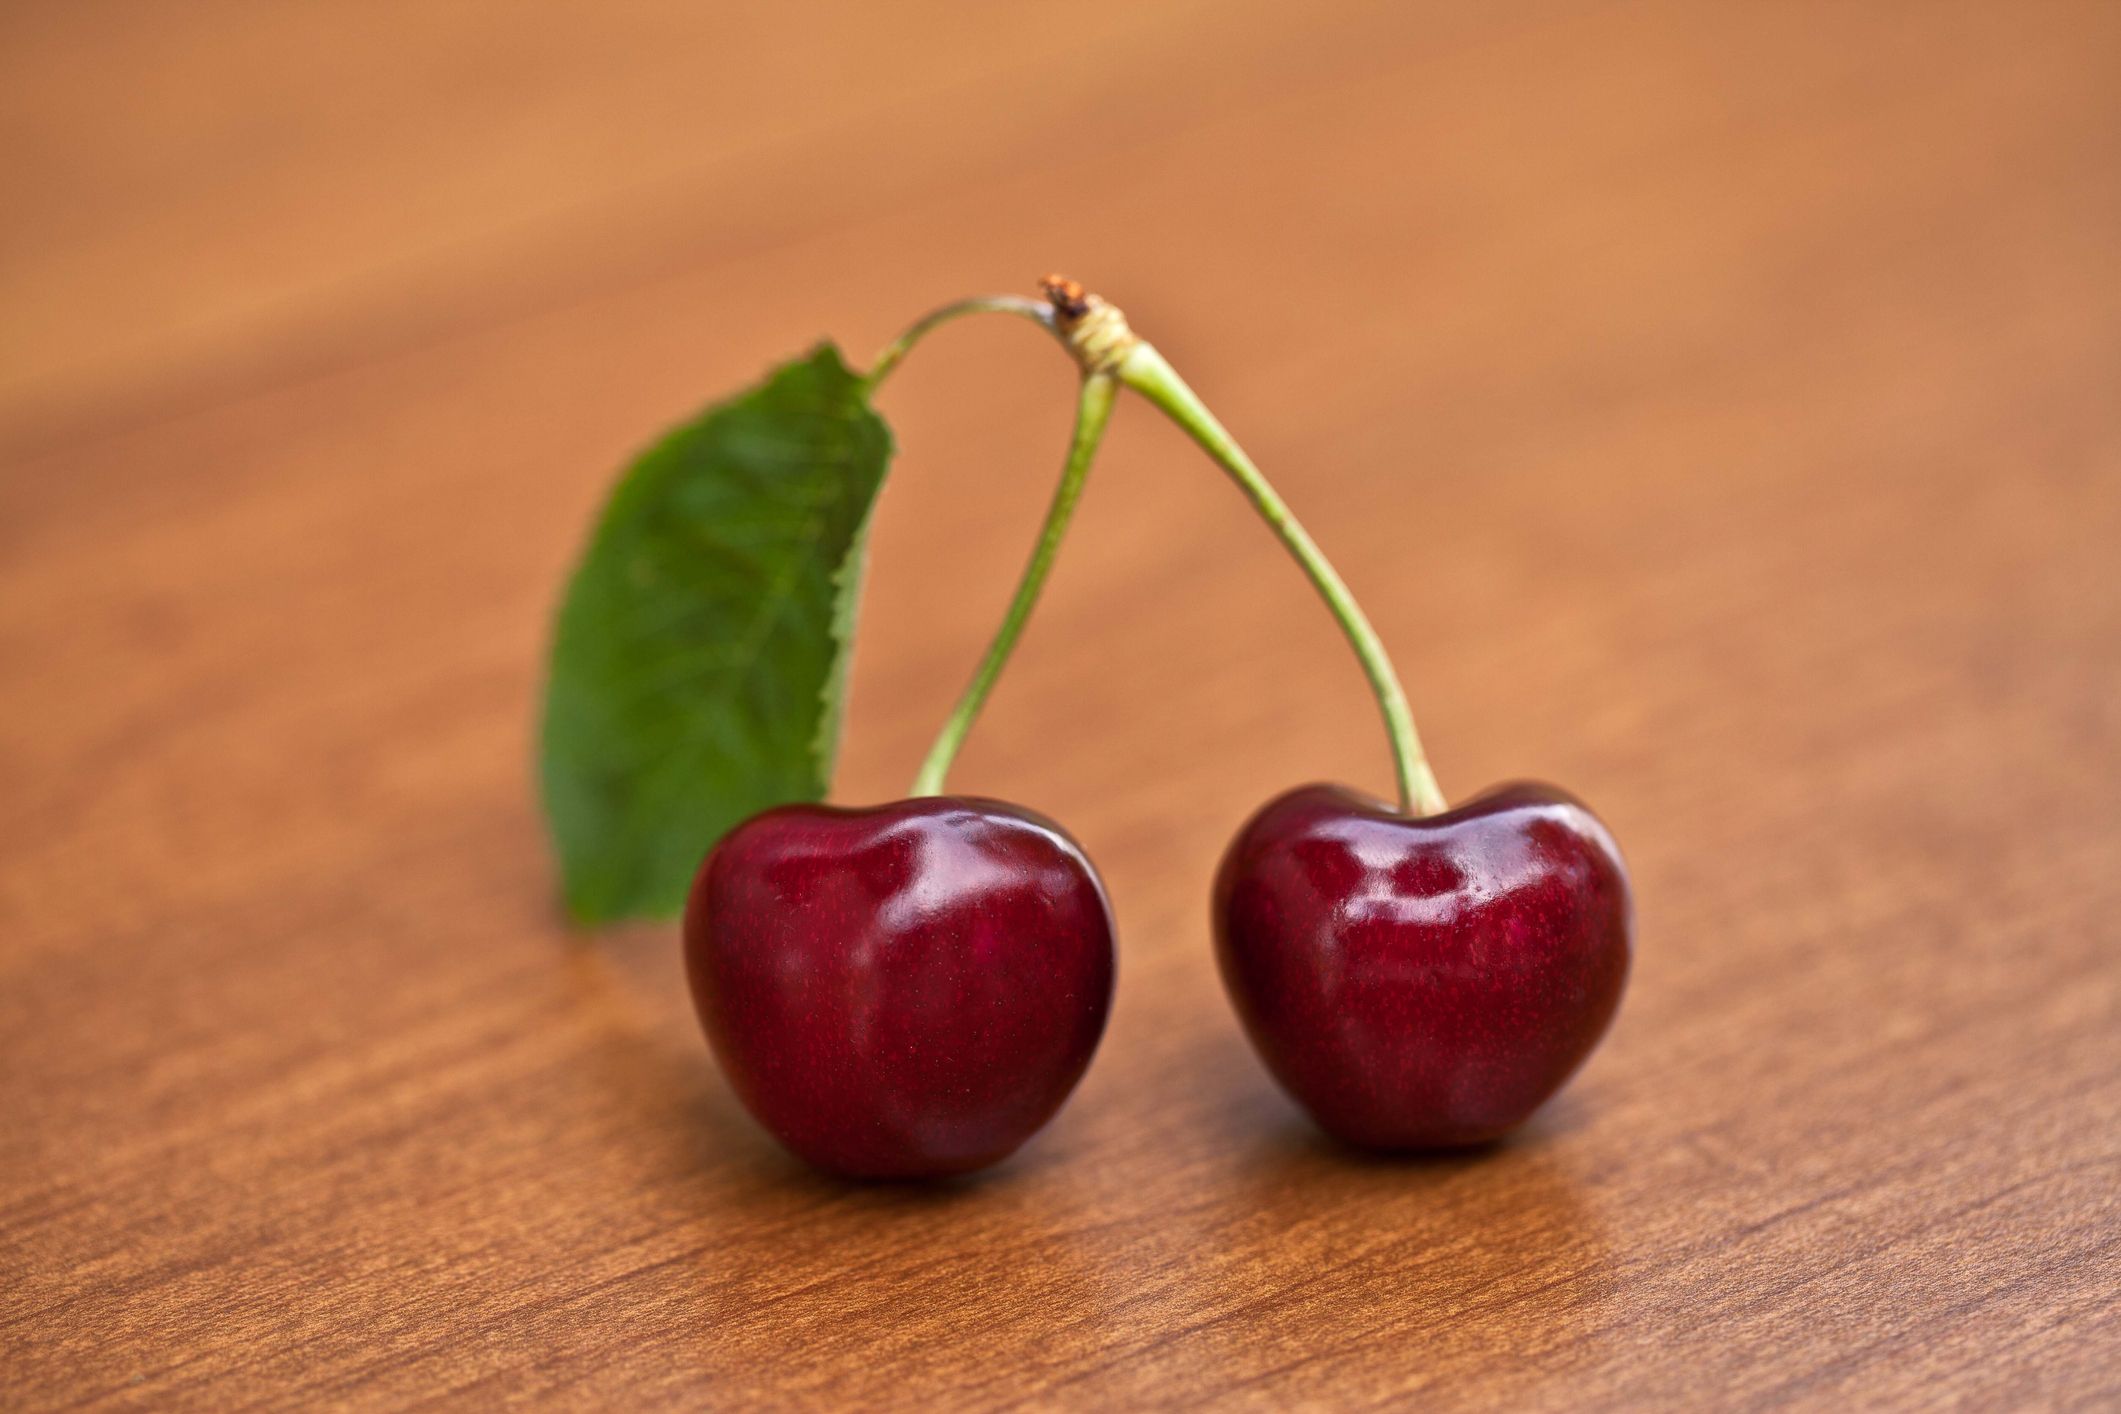 10 Different Types of Cherries - Popular Cherry Varieties to Know